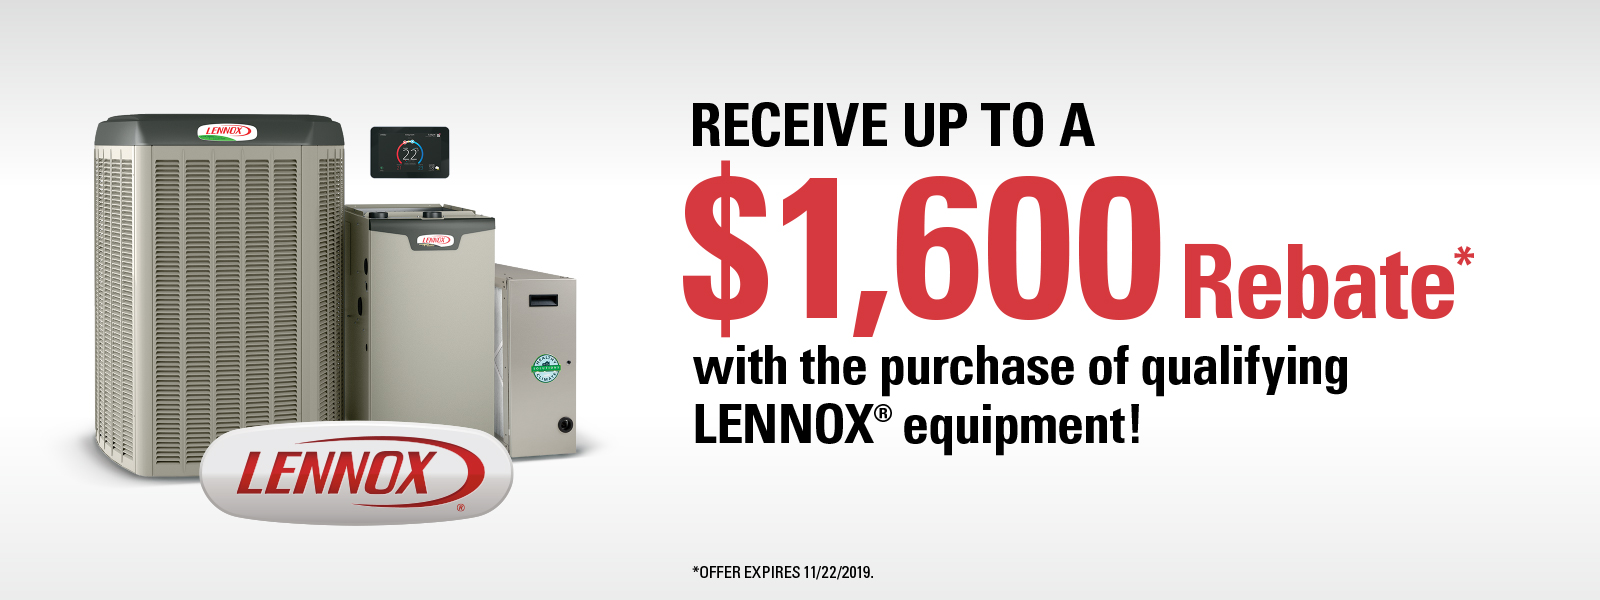 Lennox Furnace And Air Conditioner Rebates And Finance Promotions